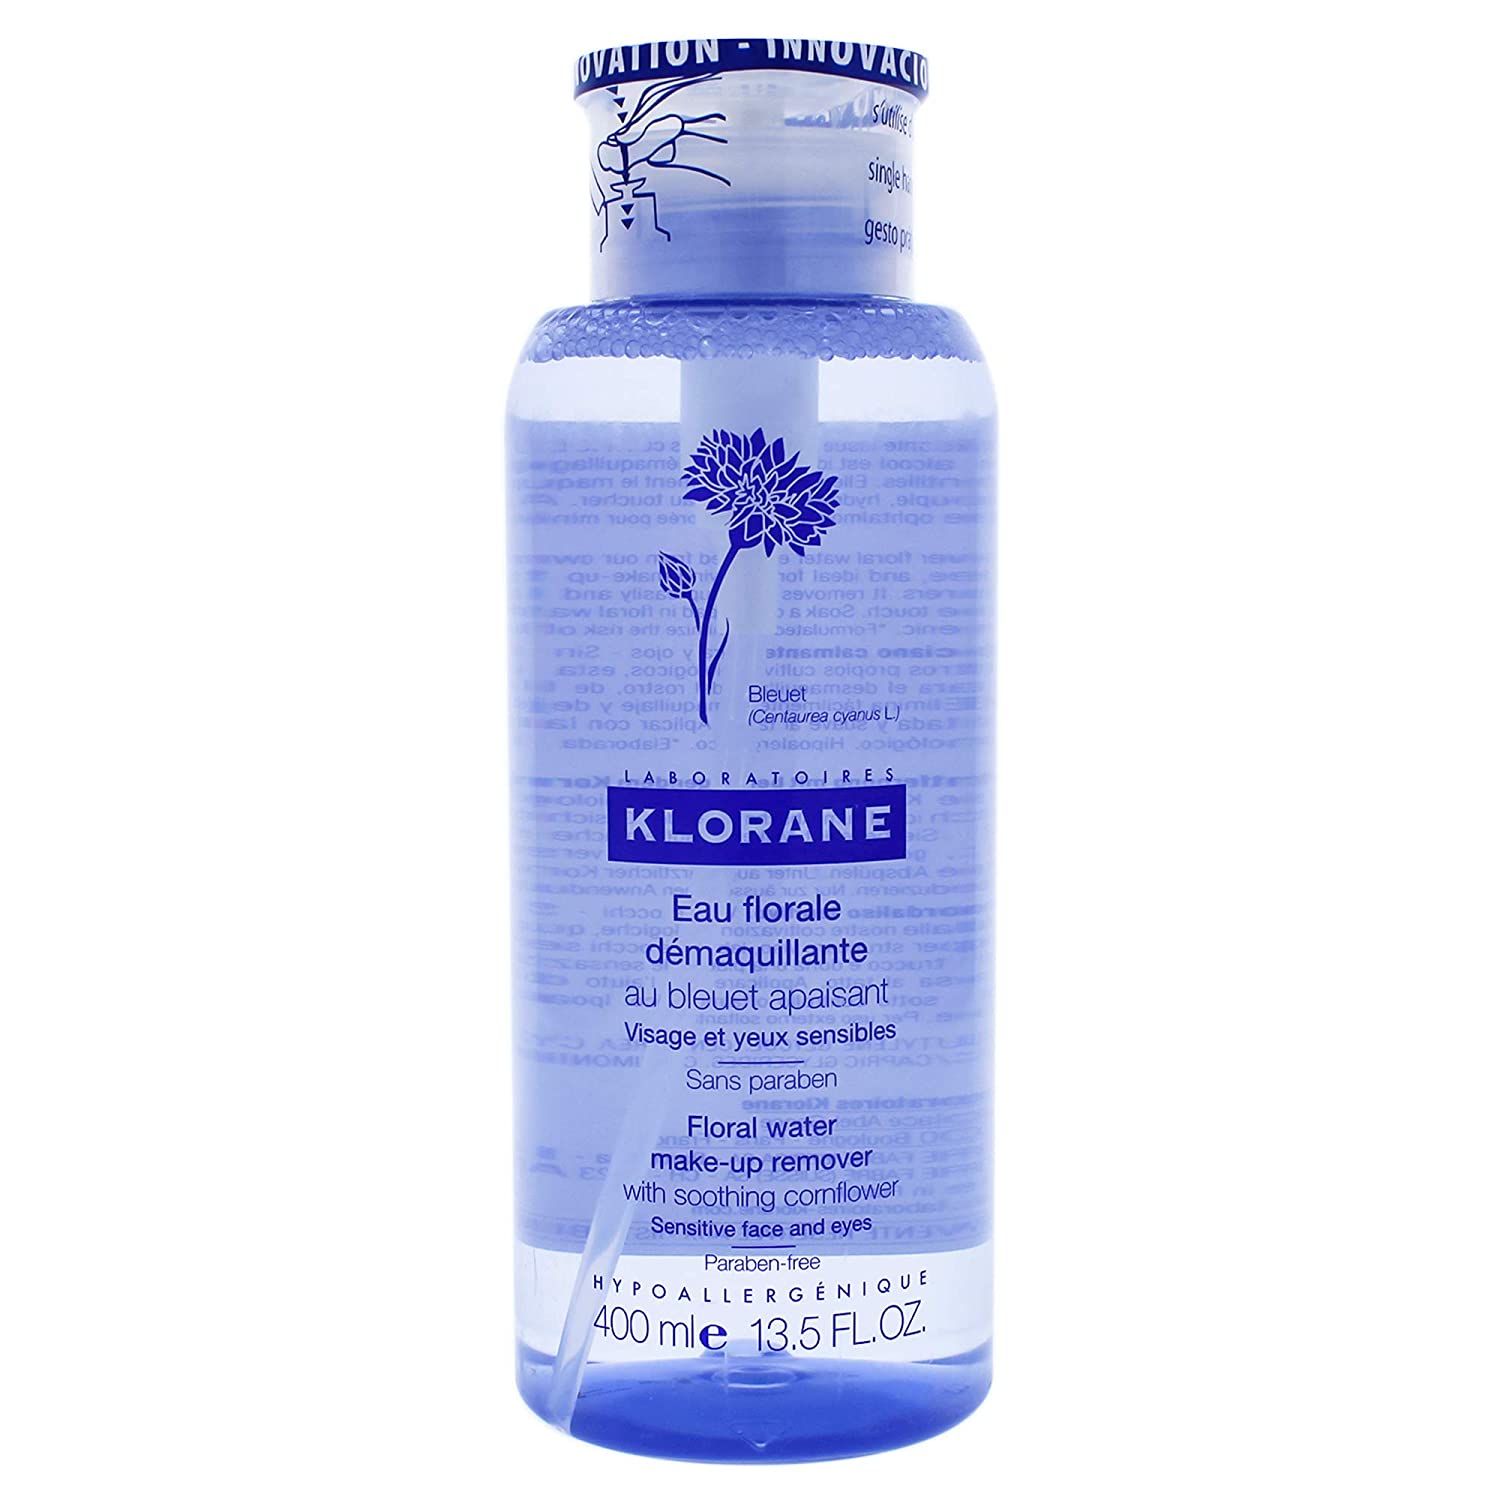 Klorane Floral Water Make-Up Remover with Soothing Cornflower 400ml